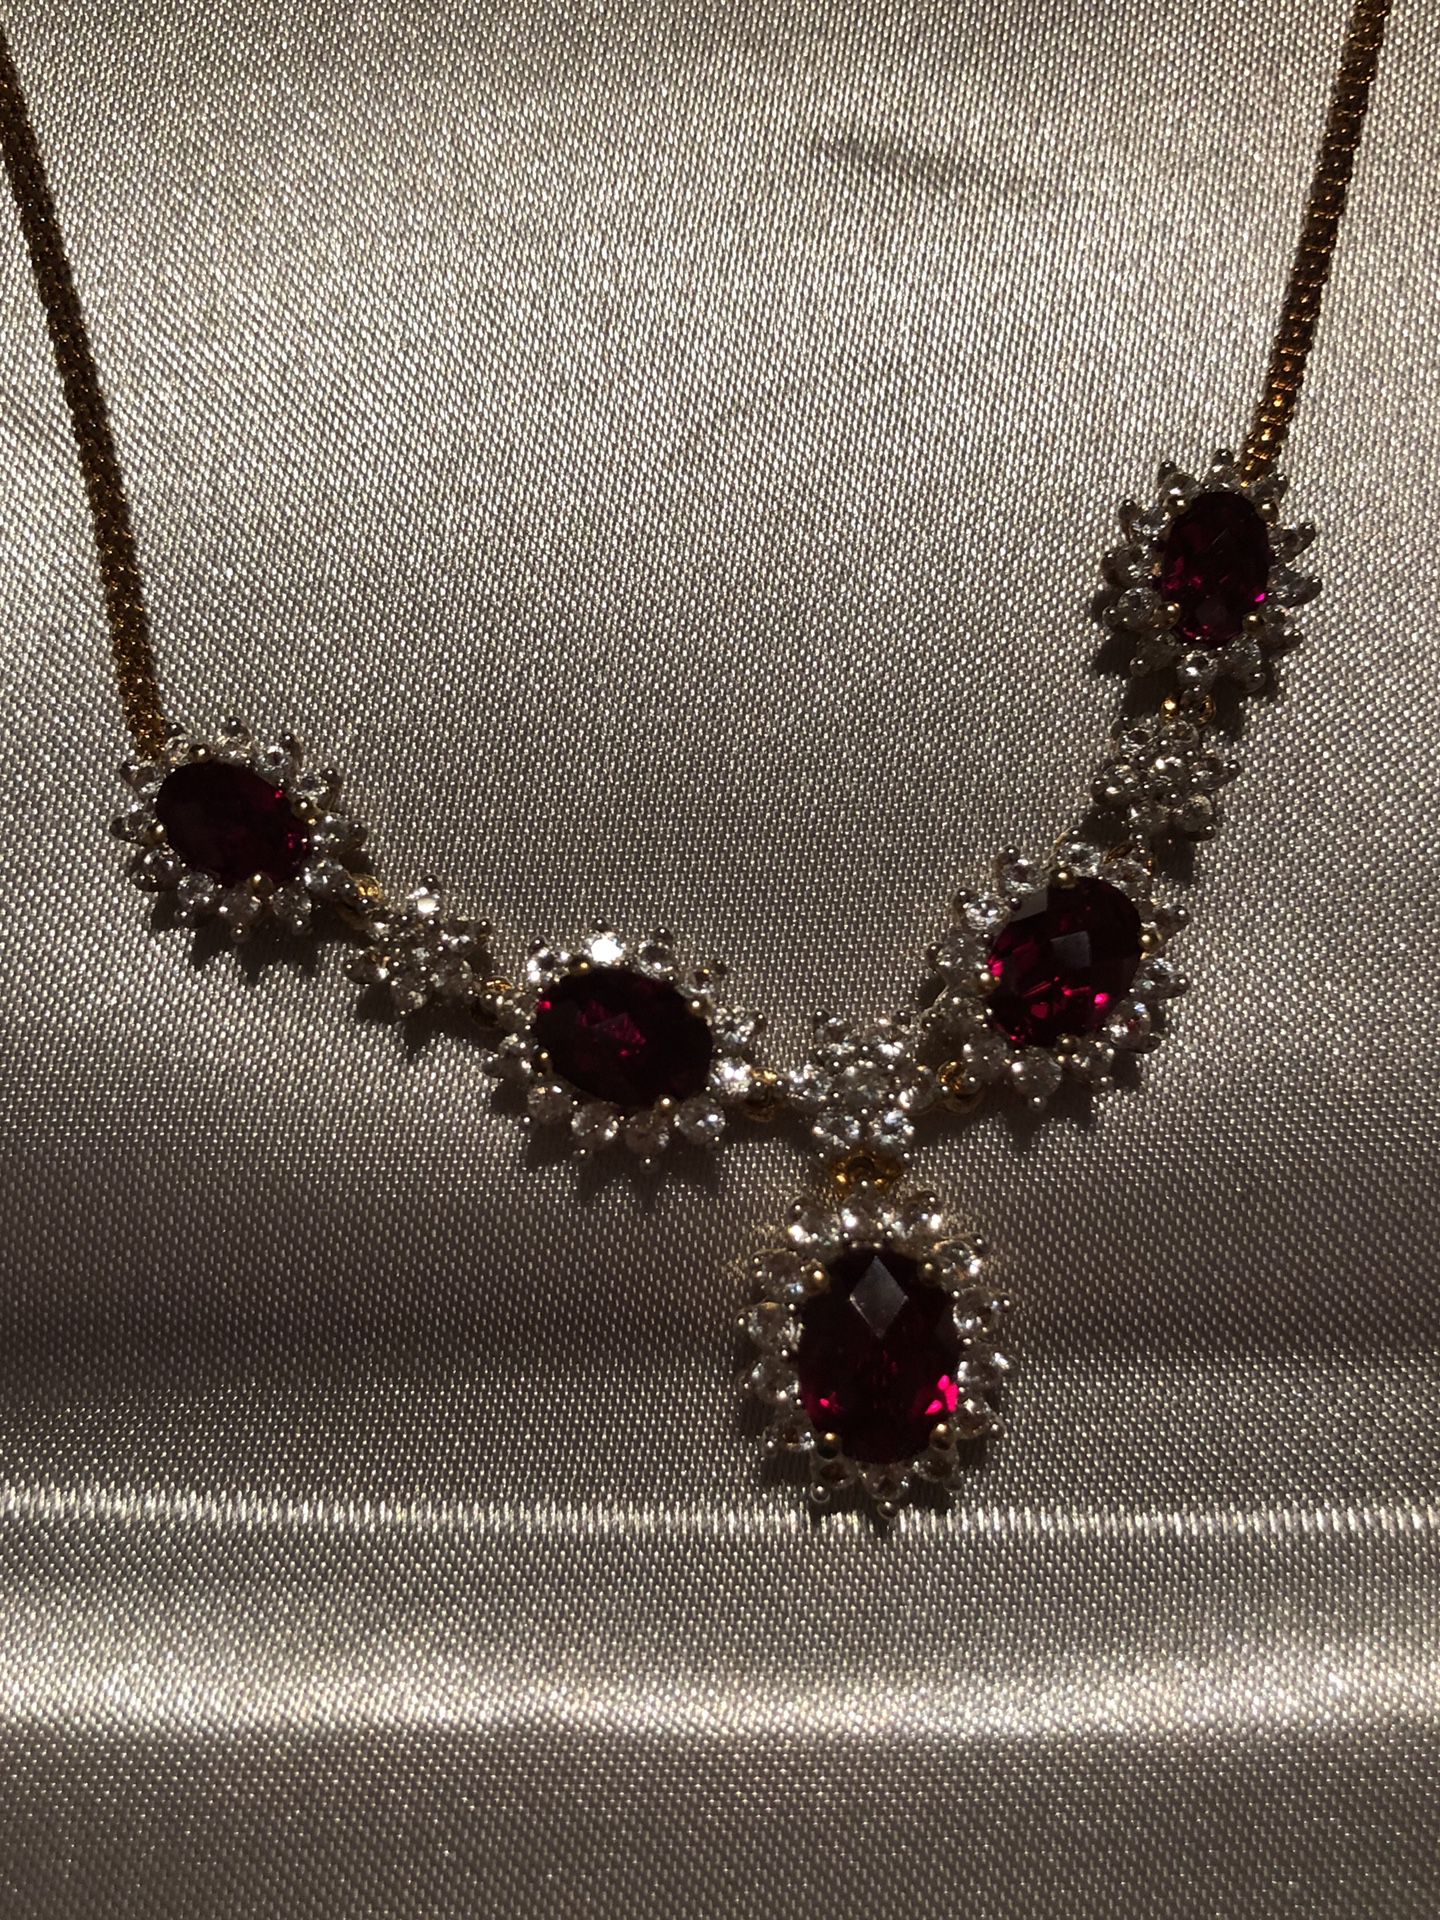 Garnet Earrings and matching necklace.